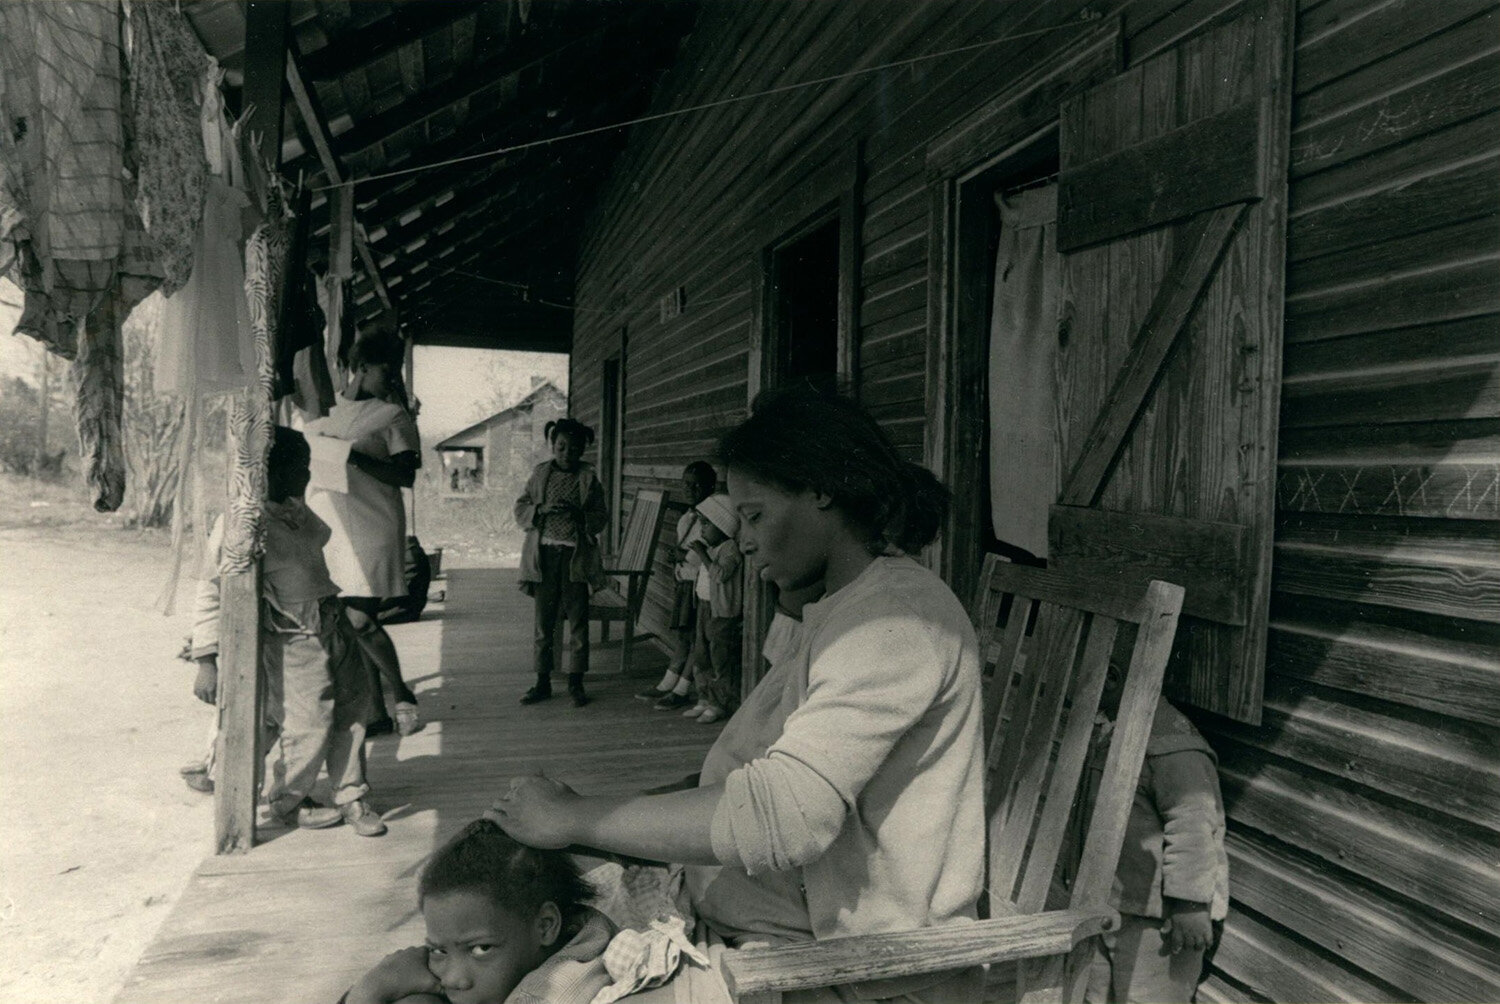   Two-family tobacco tenant house , 1964 Silver Gelatin Print 4 3/4 × 7 1/4 in. (image size) The Do Good Fund, Inc., 2017-44 